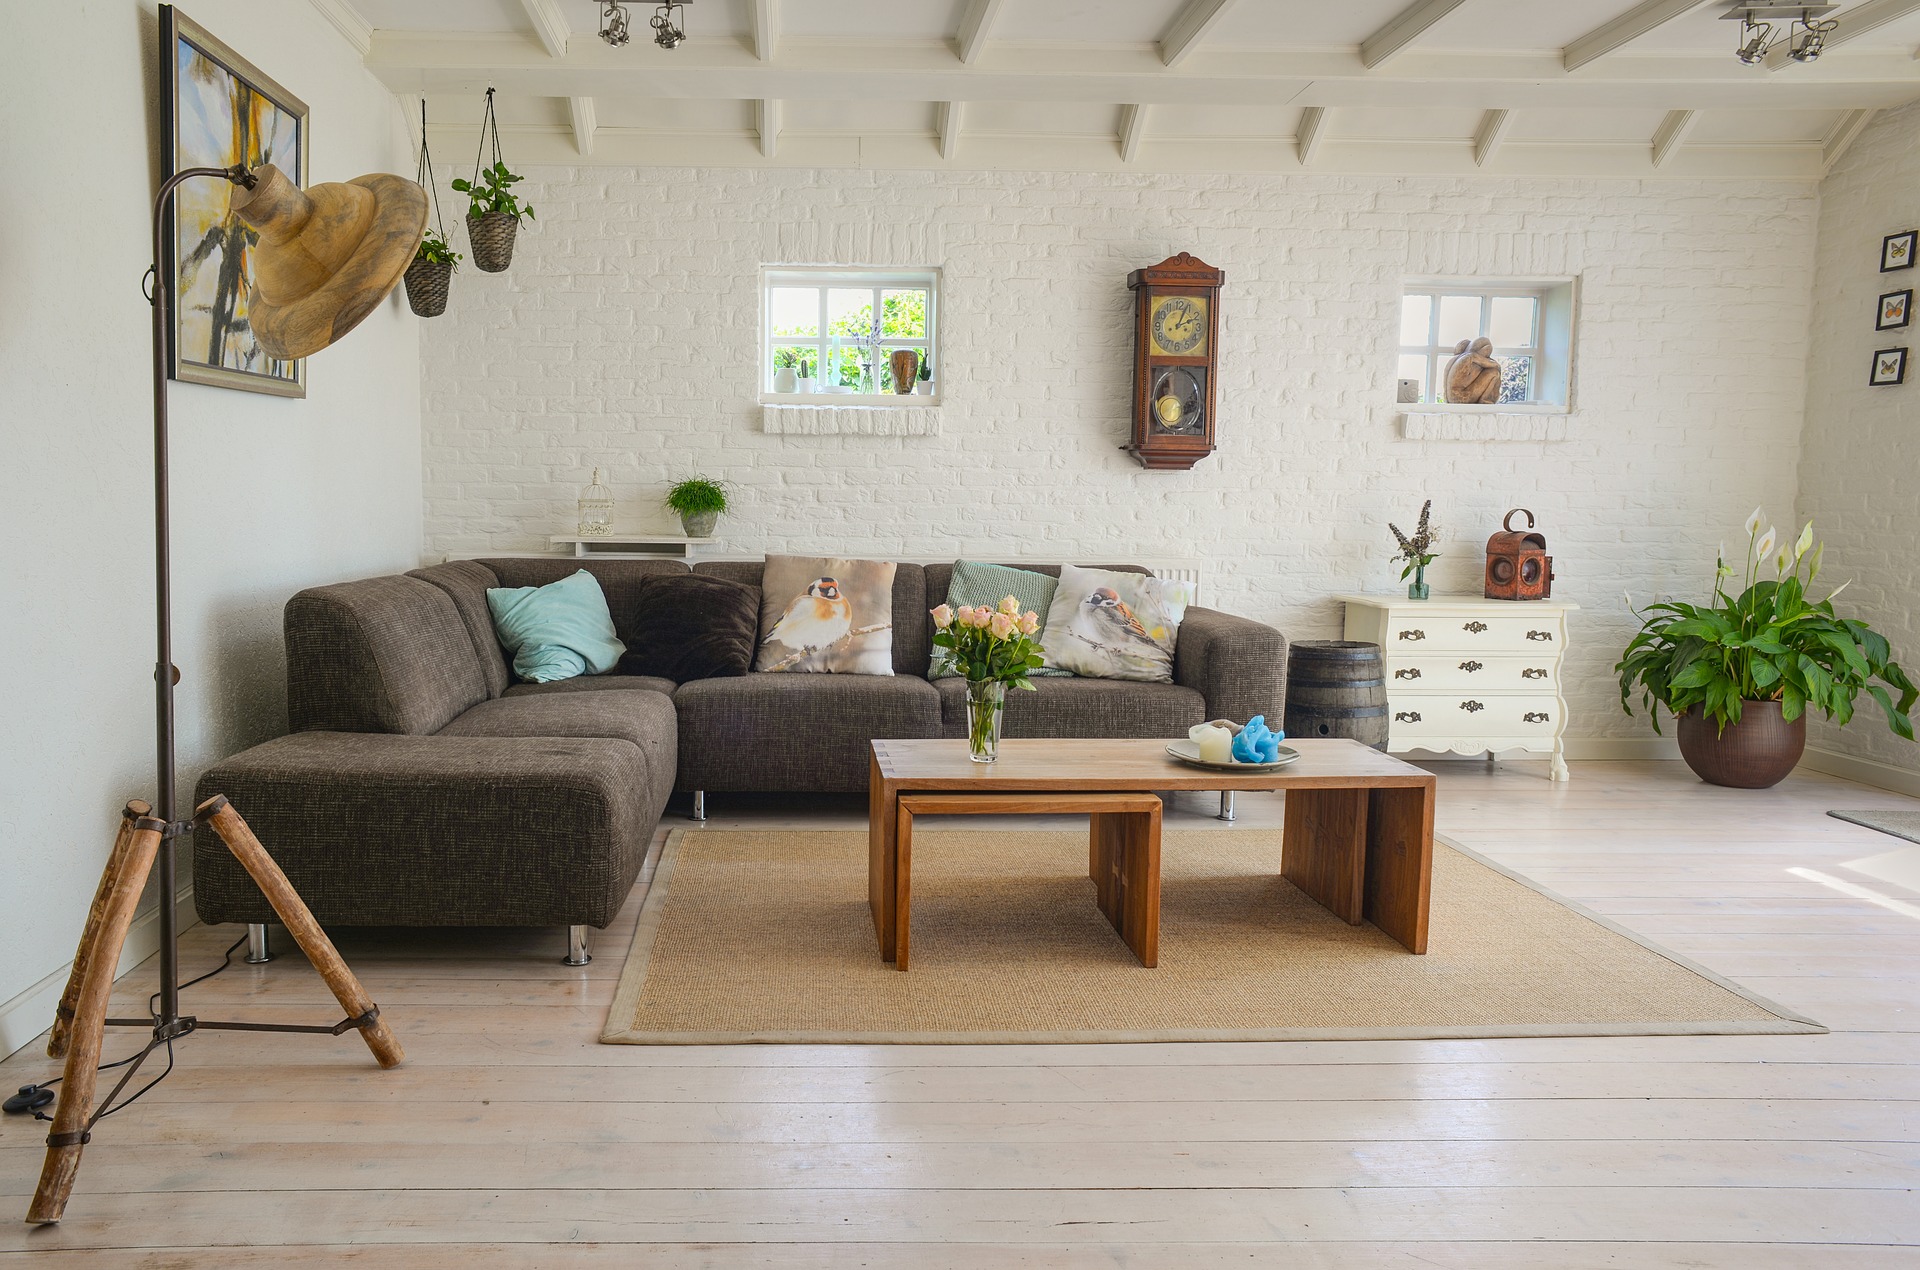 10 Awesome Tips on How to Build a Mid-Century Living Room